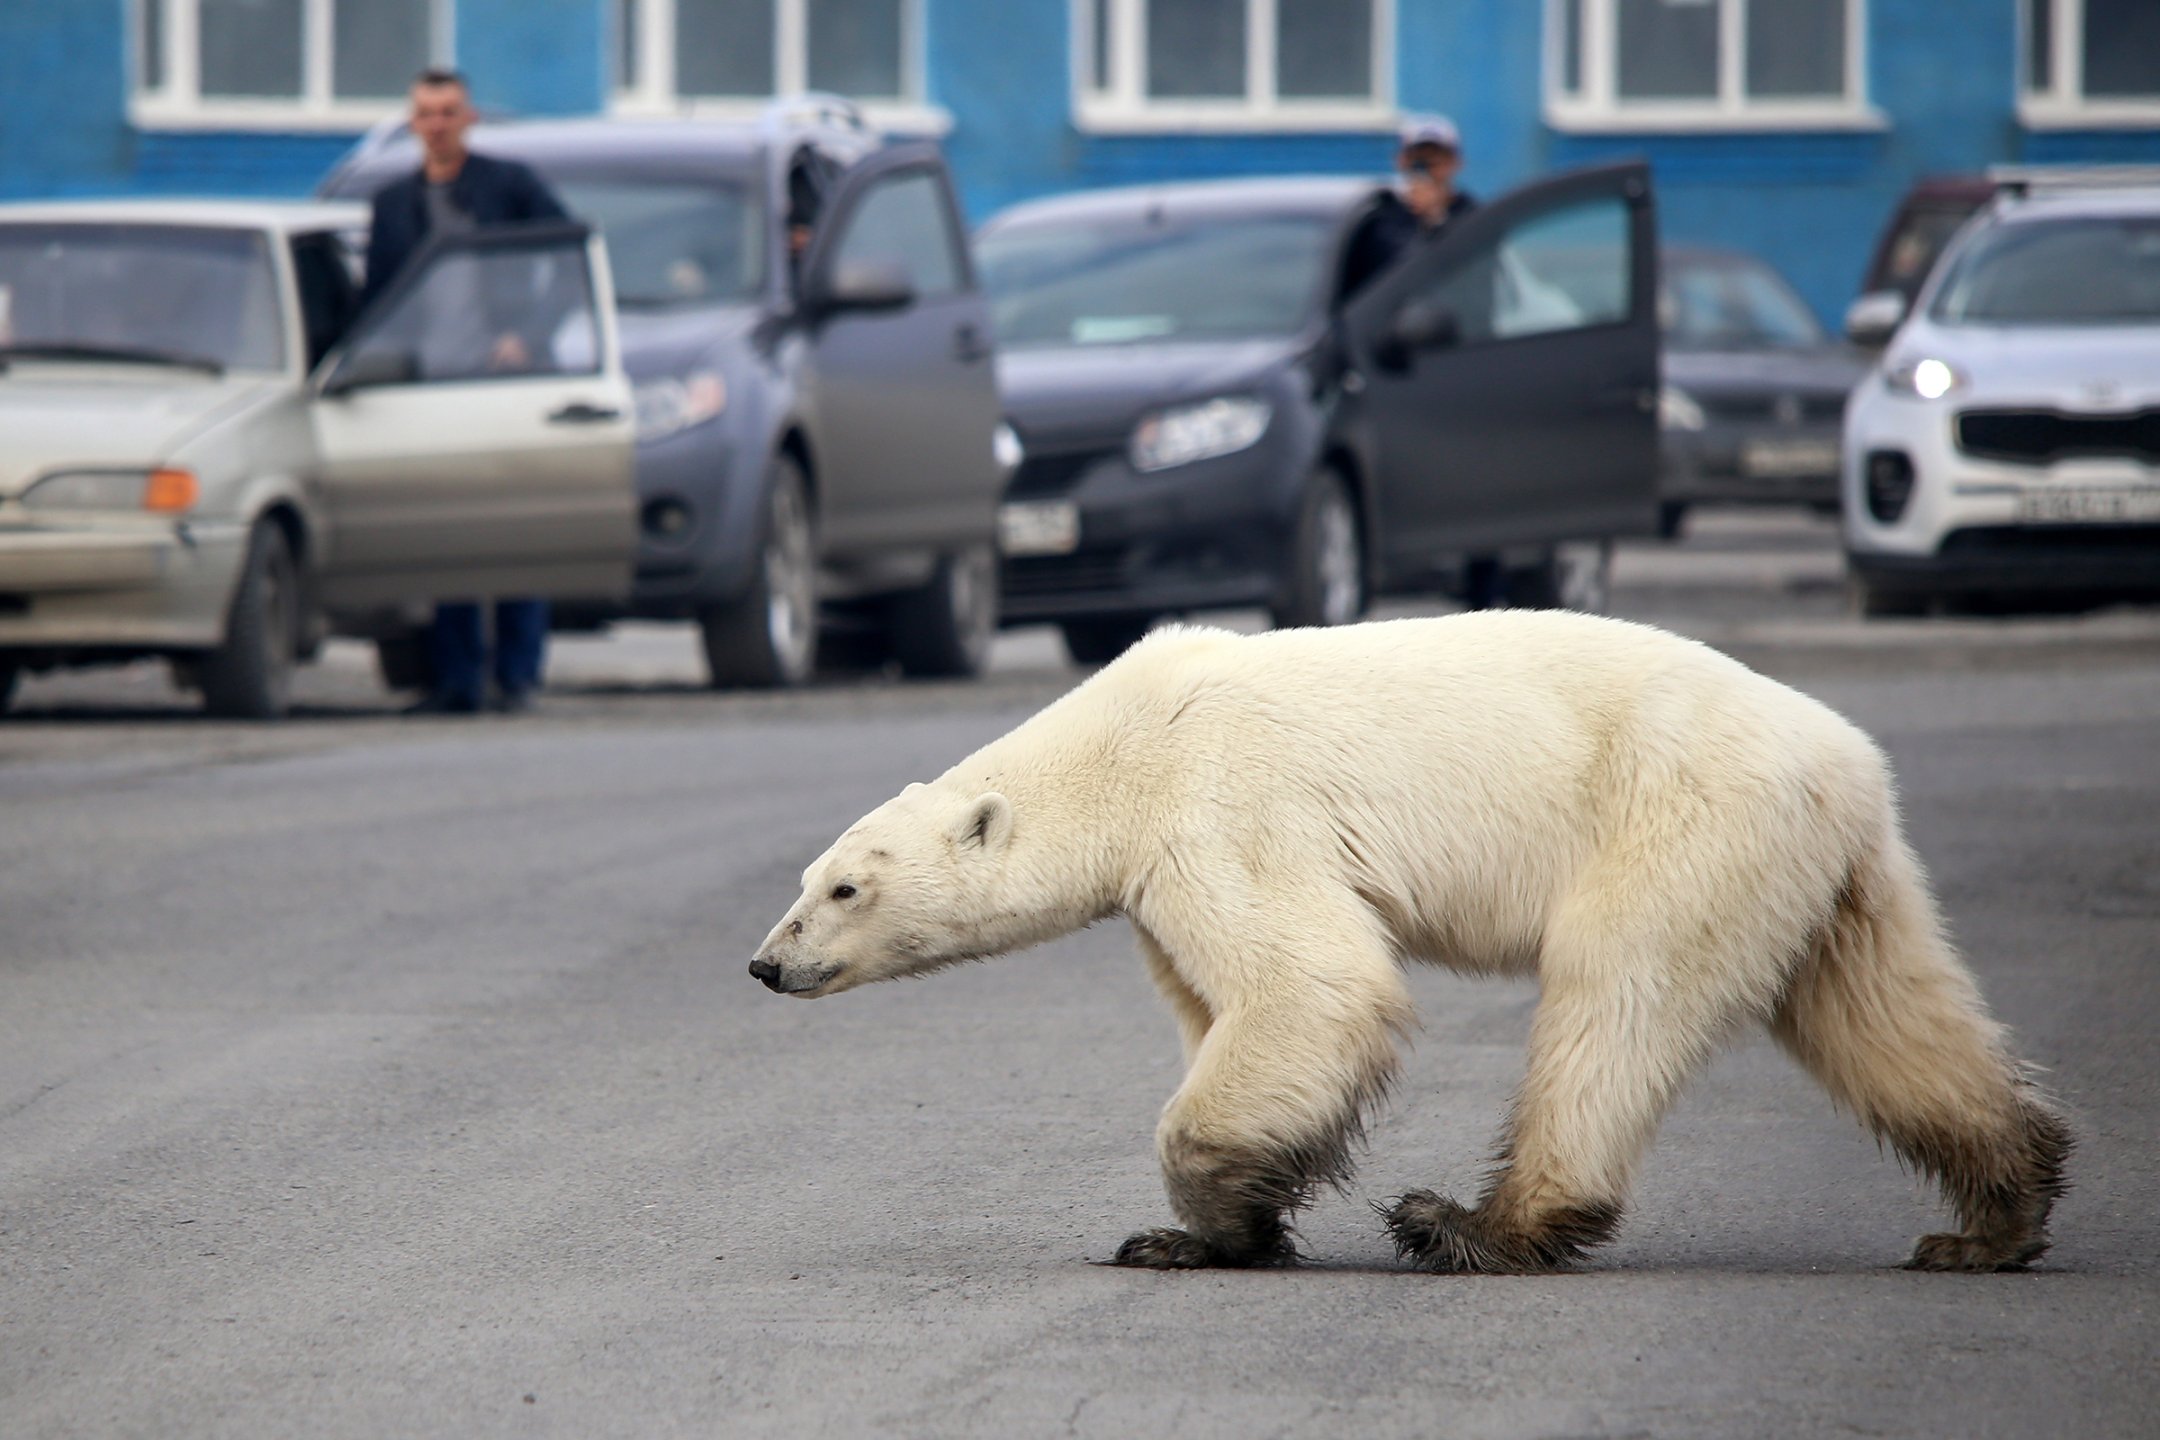 A stray polar bear walks on a road on the outskirts of the Russian industrial city of Norilsk in June. The hungry bear was said to be hundreds of miles from its natural habitat.